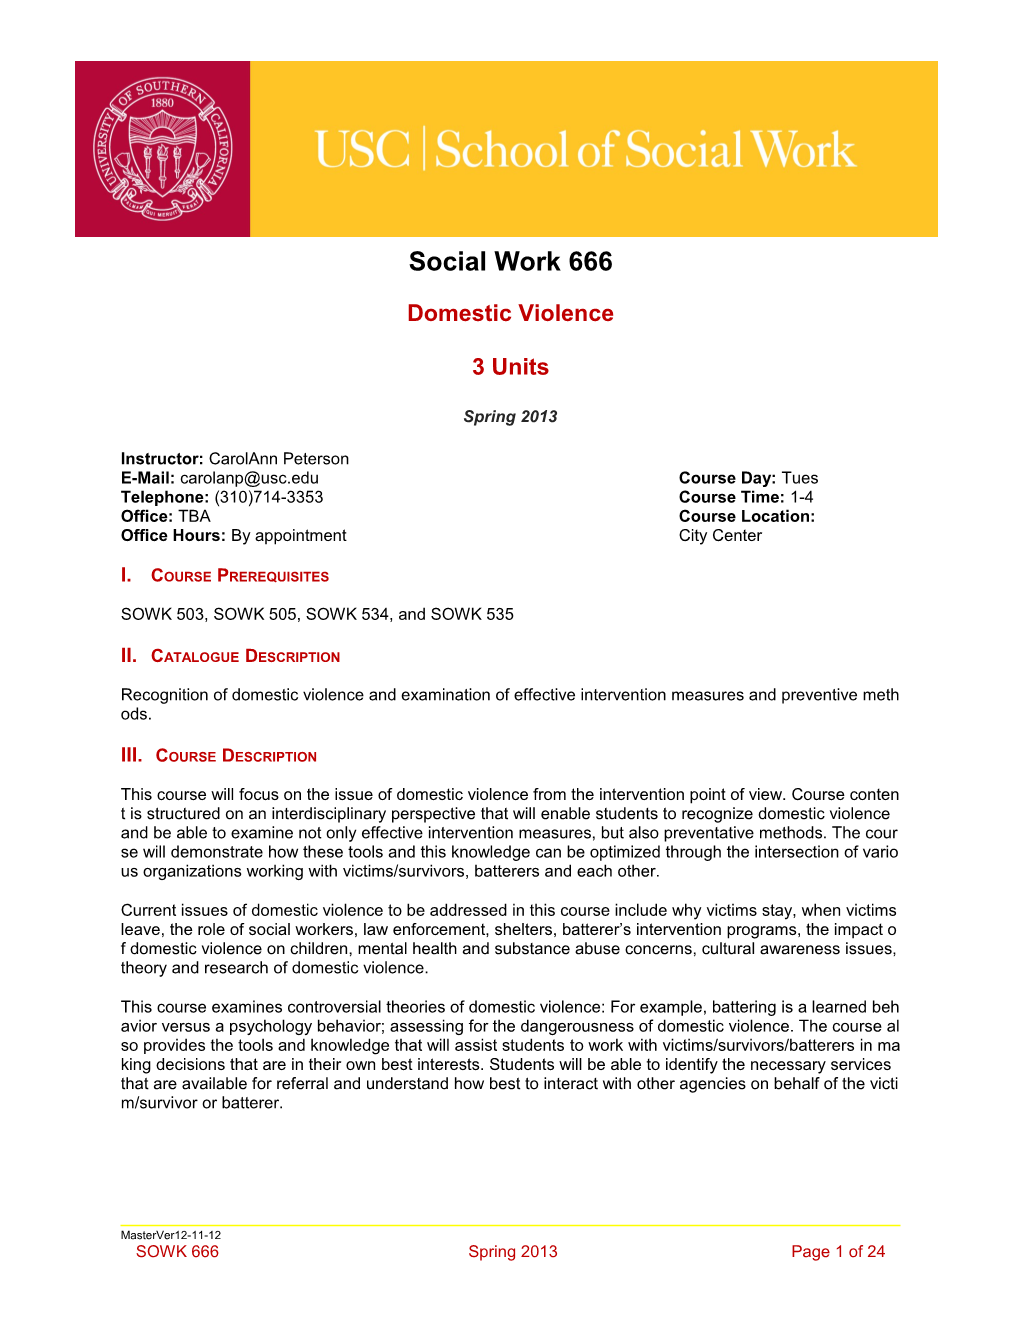 School of Social Work Syllabus Template Guide s12